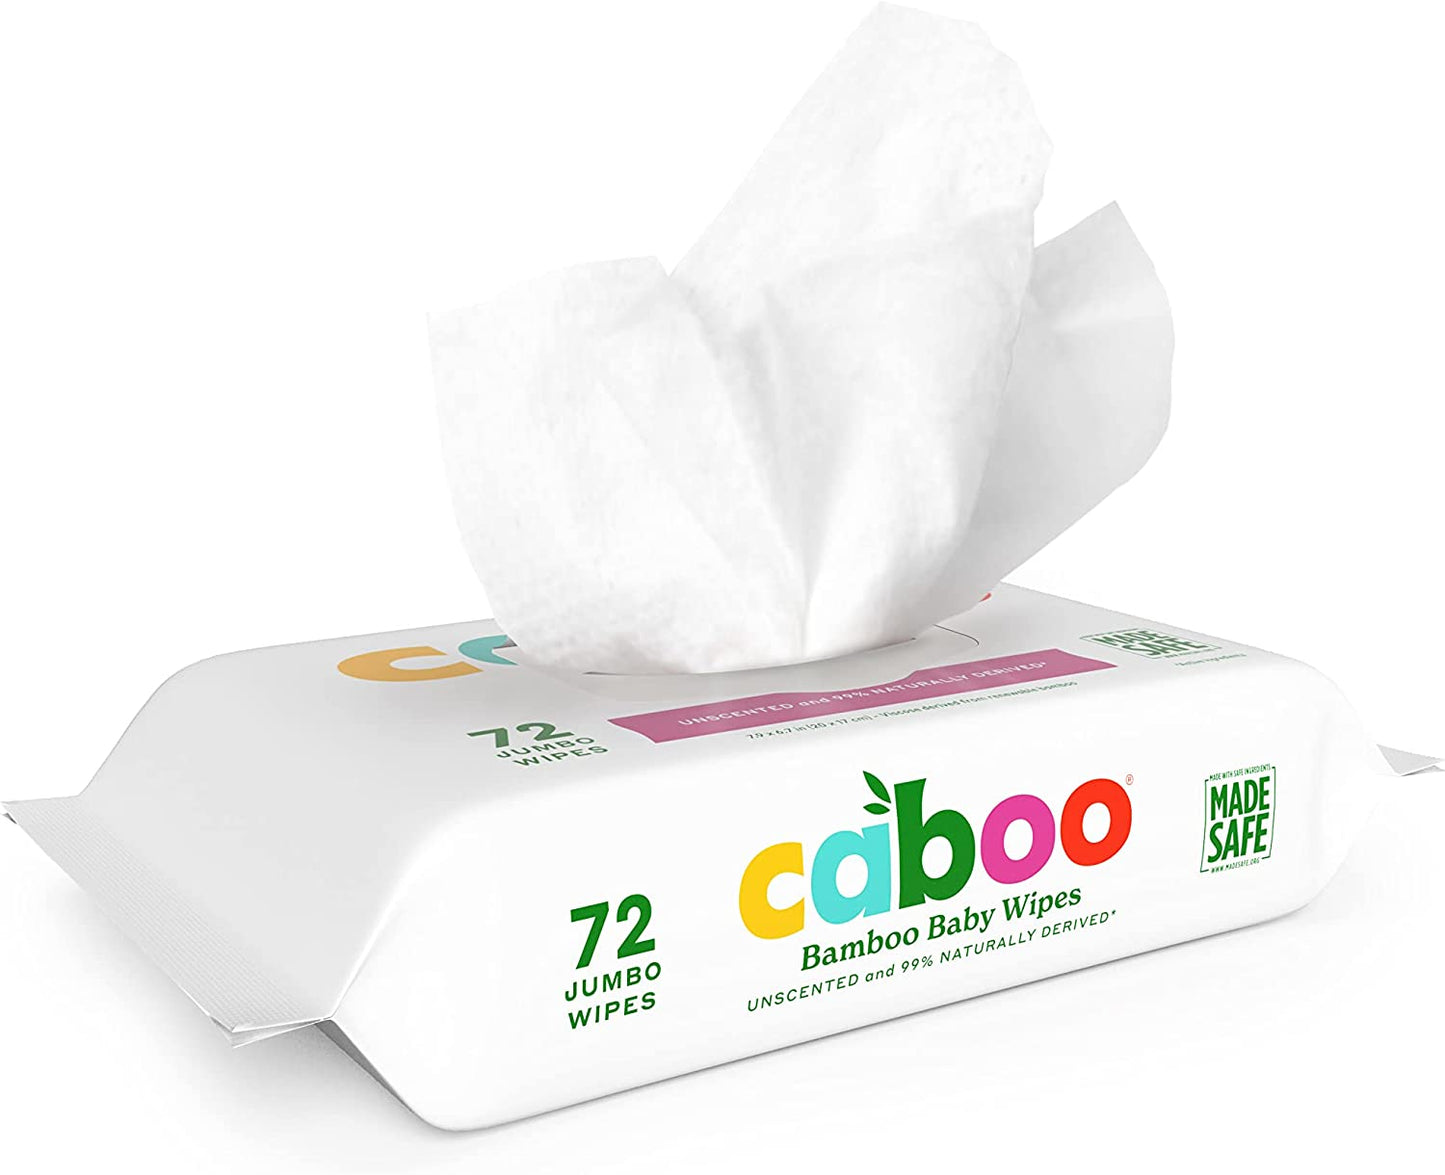 Caboo Paper Products - Bamboo Baby Wipes